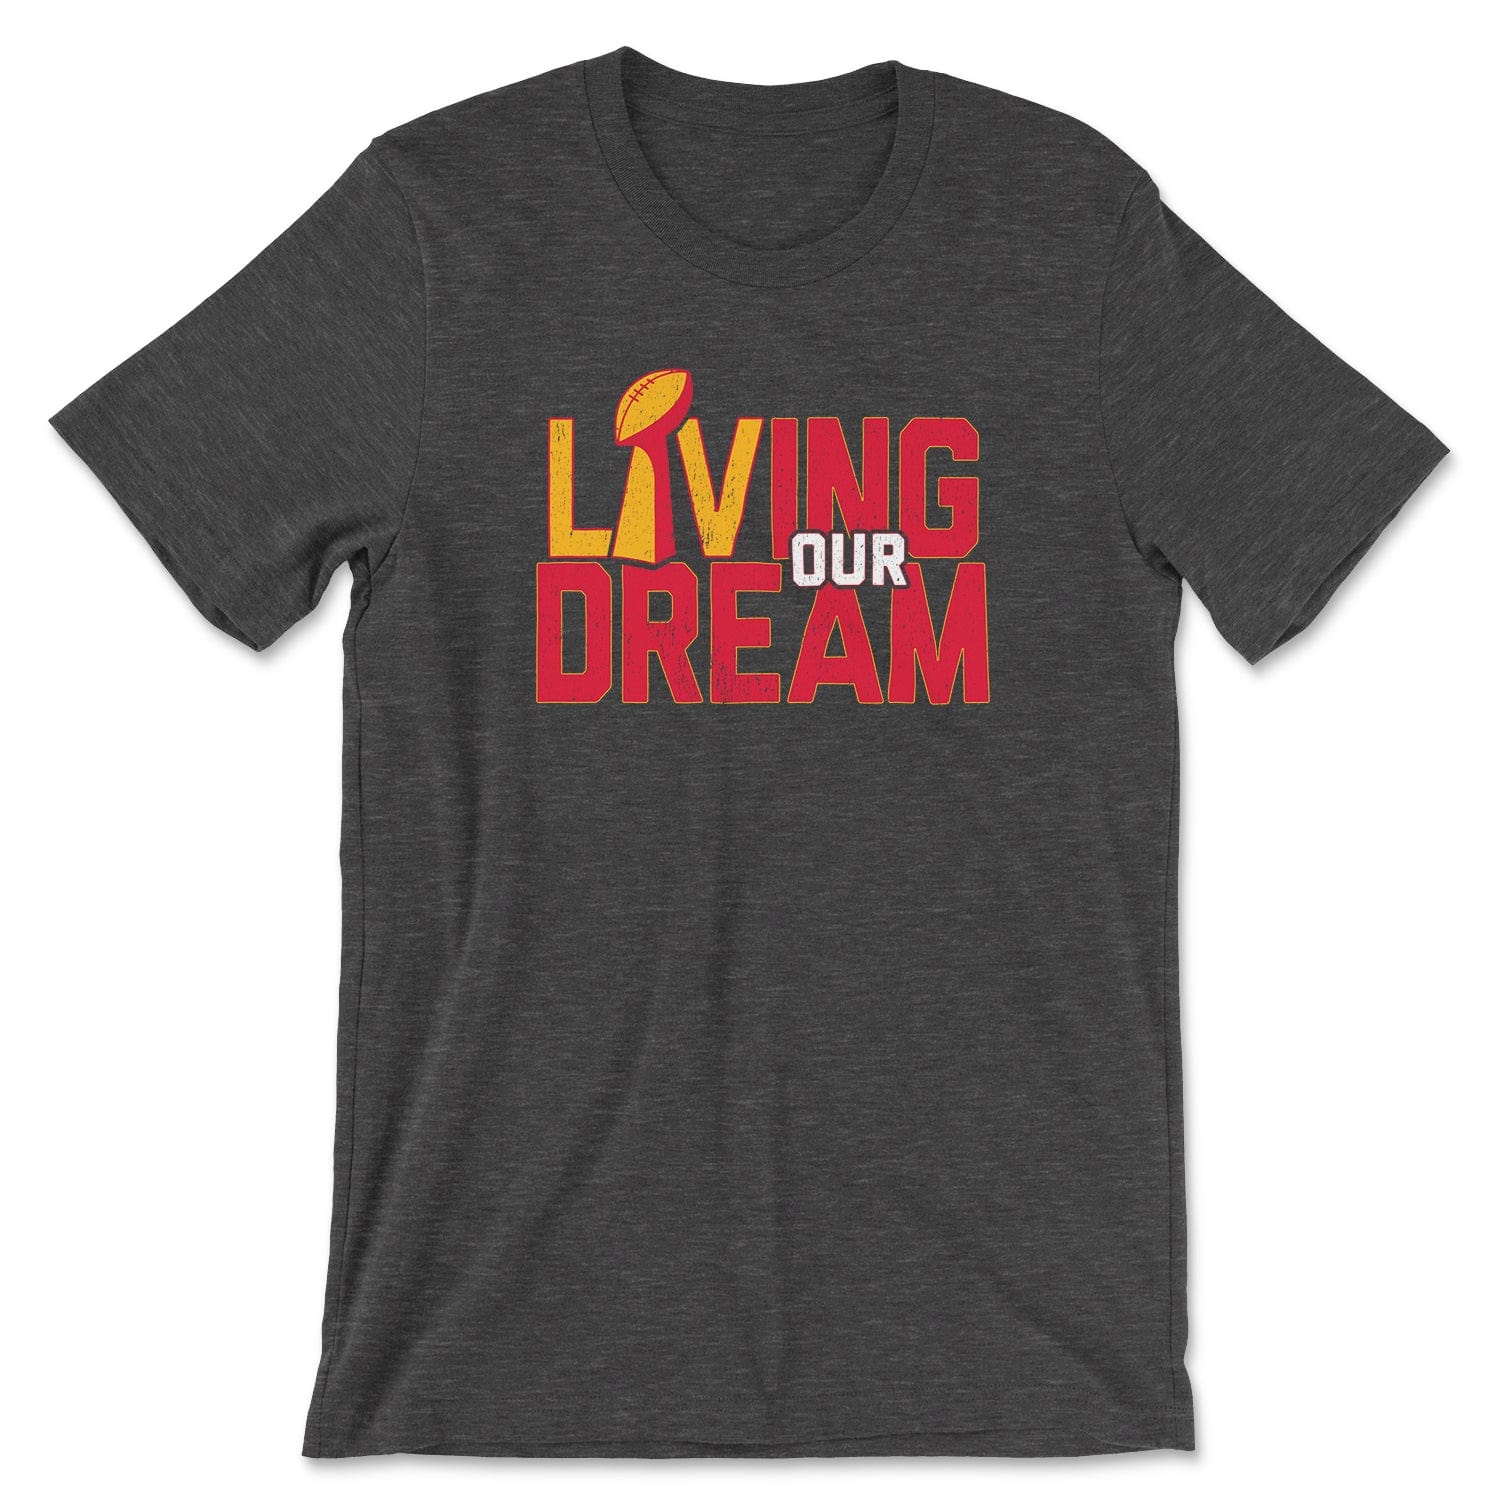 KC Swag Kansas City Chiefs red/yellow/white L(Lombardi trophy)IVING OUR DREAM on dark heather grey t-shirt